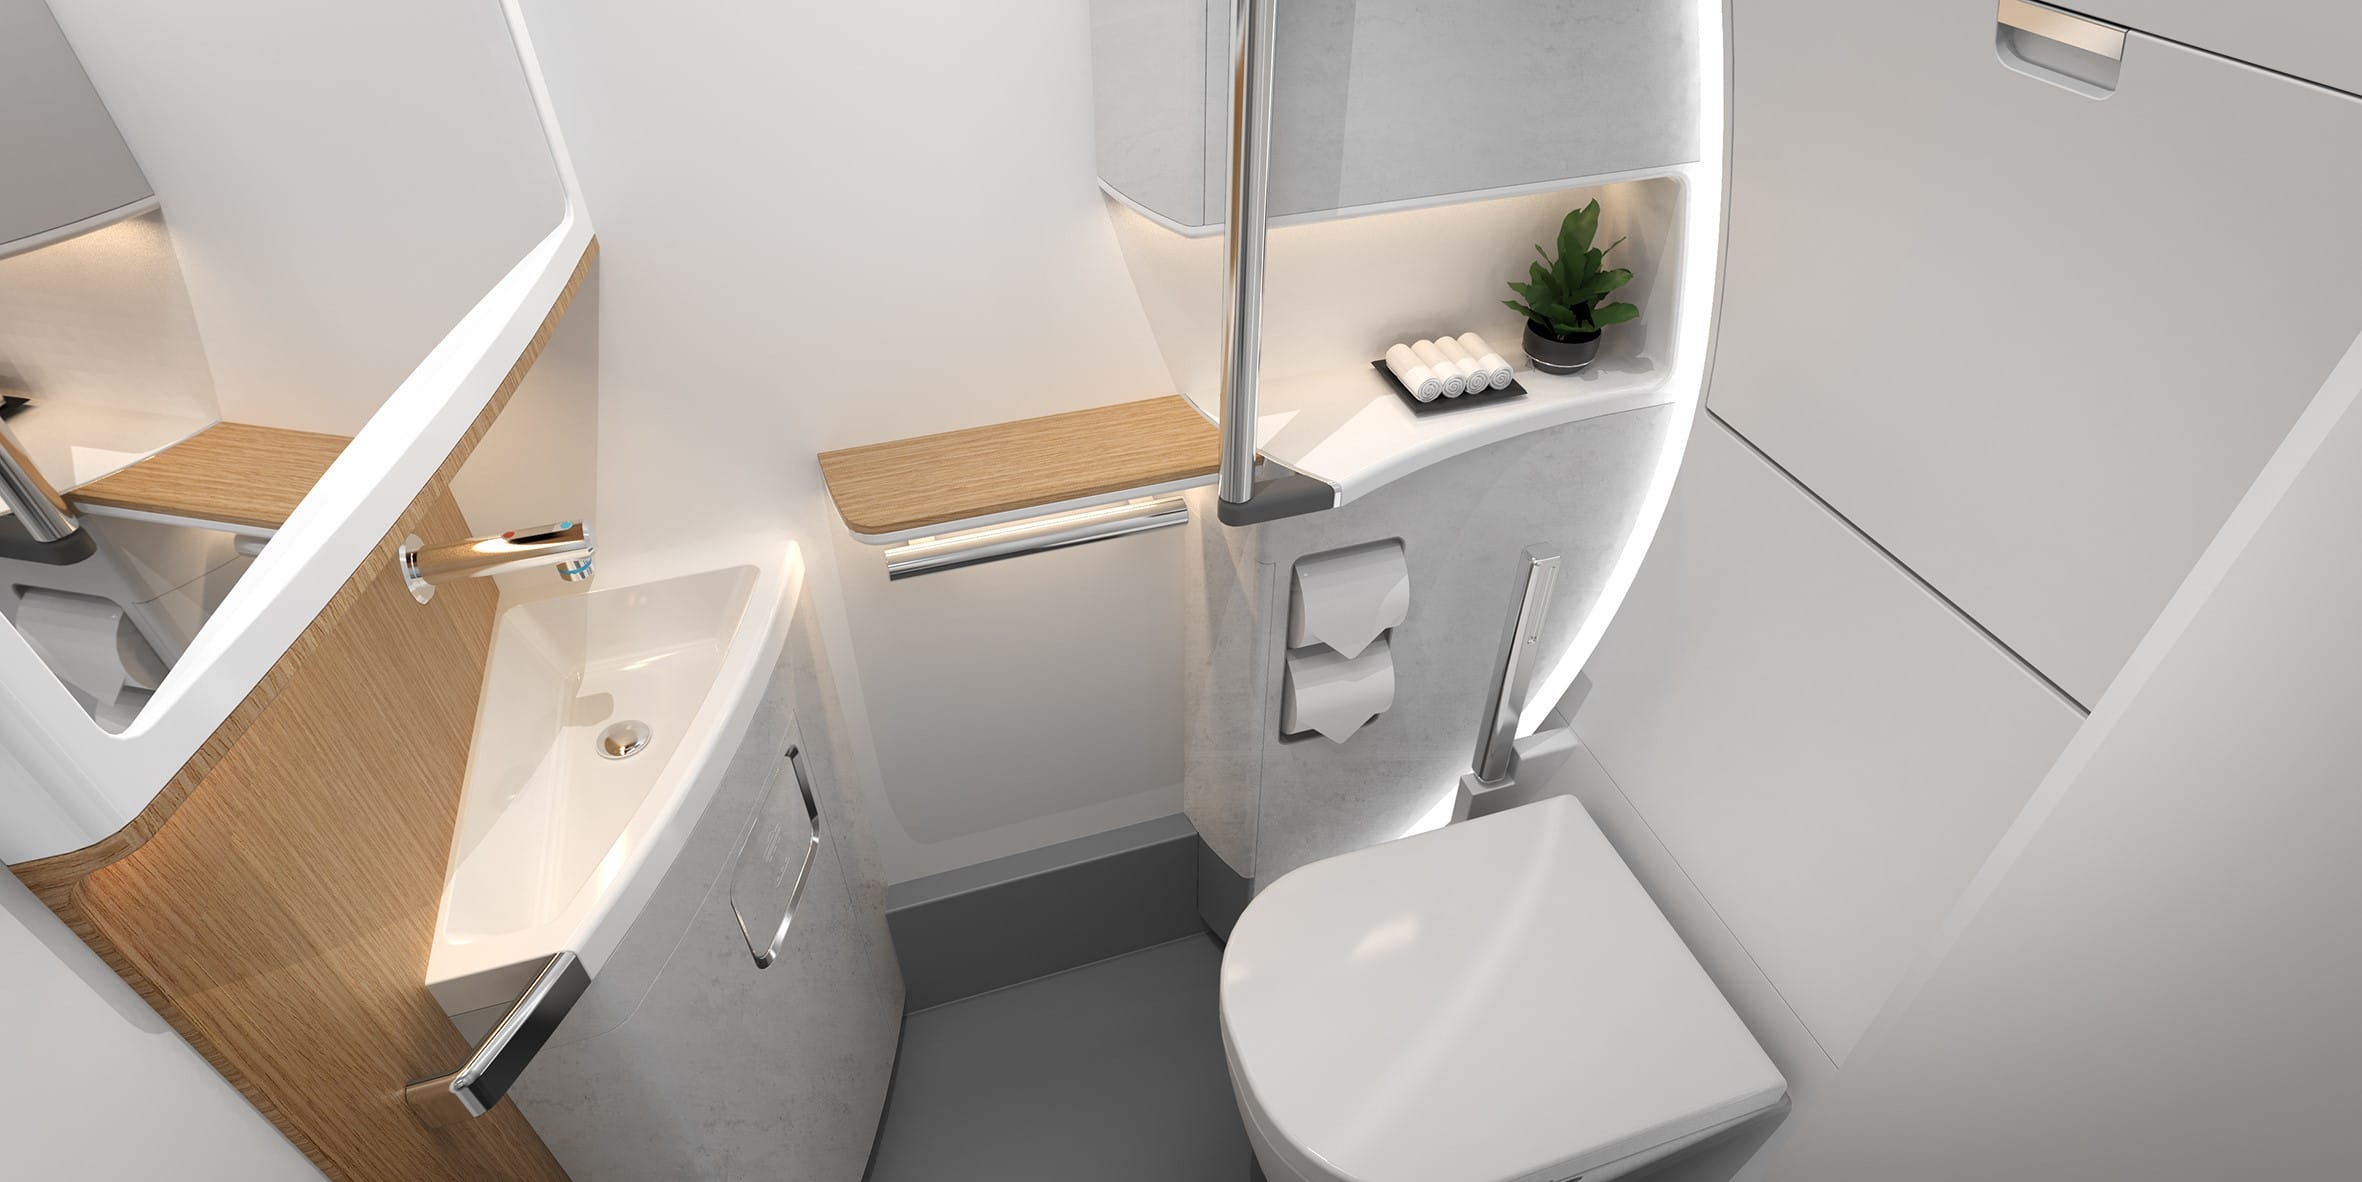 ST Engineering and Acumen Design Associates have partnered to announce the launch of ACCESS, a new aircraft lavatory to offer passengers with reduced mobility (PRM) more space.